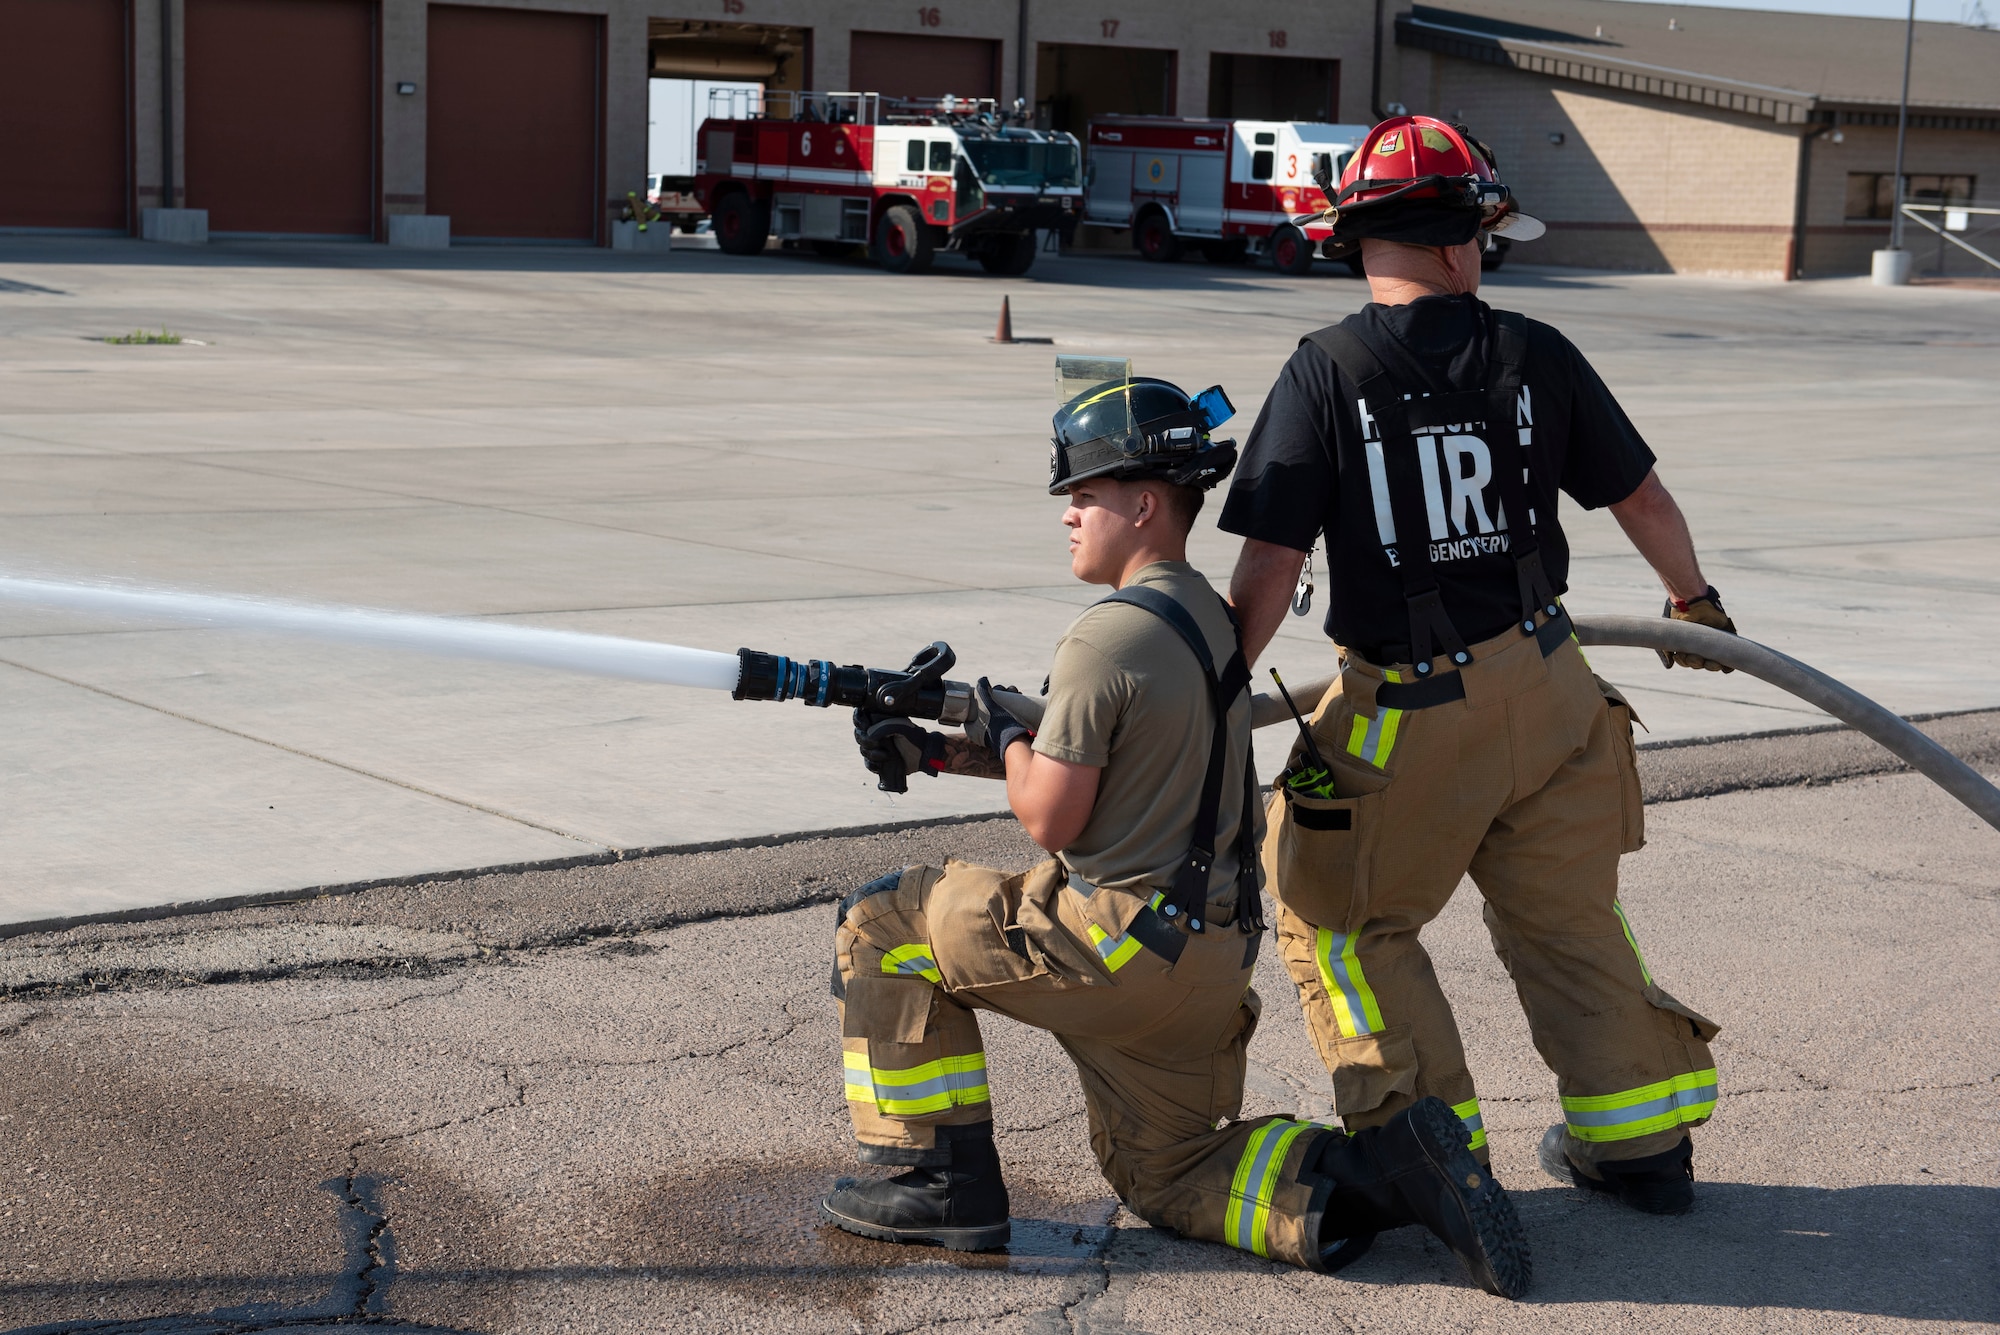 Norman Bloom (right), 49th Civil Engineer Squadron company officer and Airman 1st Class Jayden Zepeda (left), 49th CES firefighter, shoot water out of a hose during an emergency response training exercise, May 19, 2022, on Holloman Air Force Base, New Mexico.